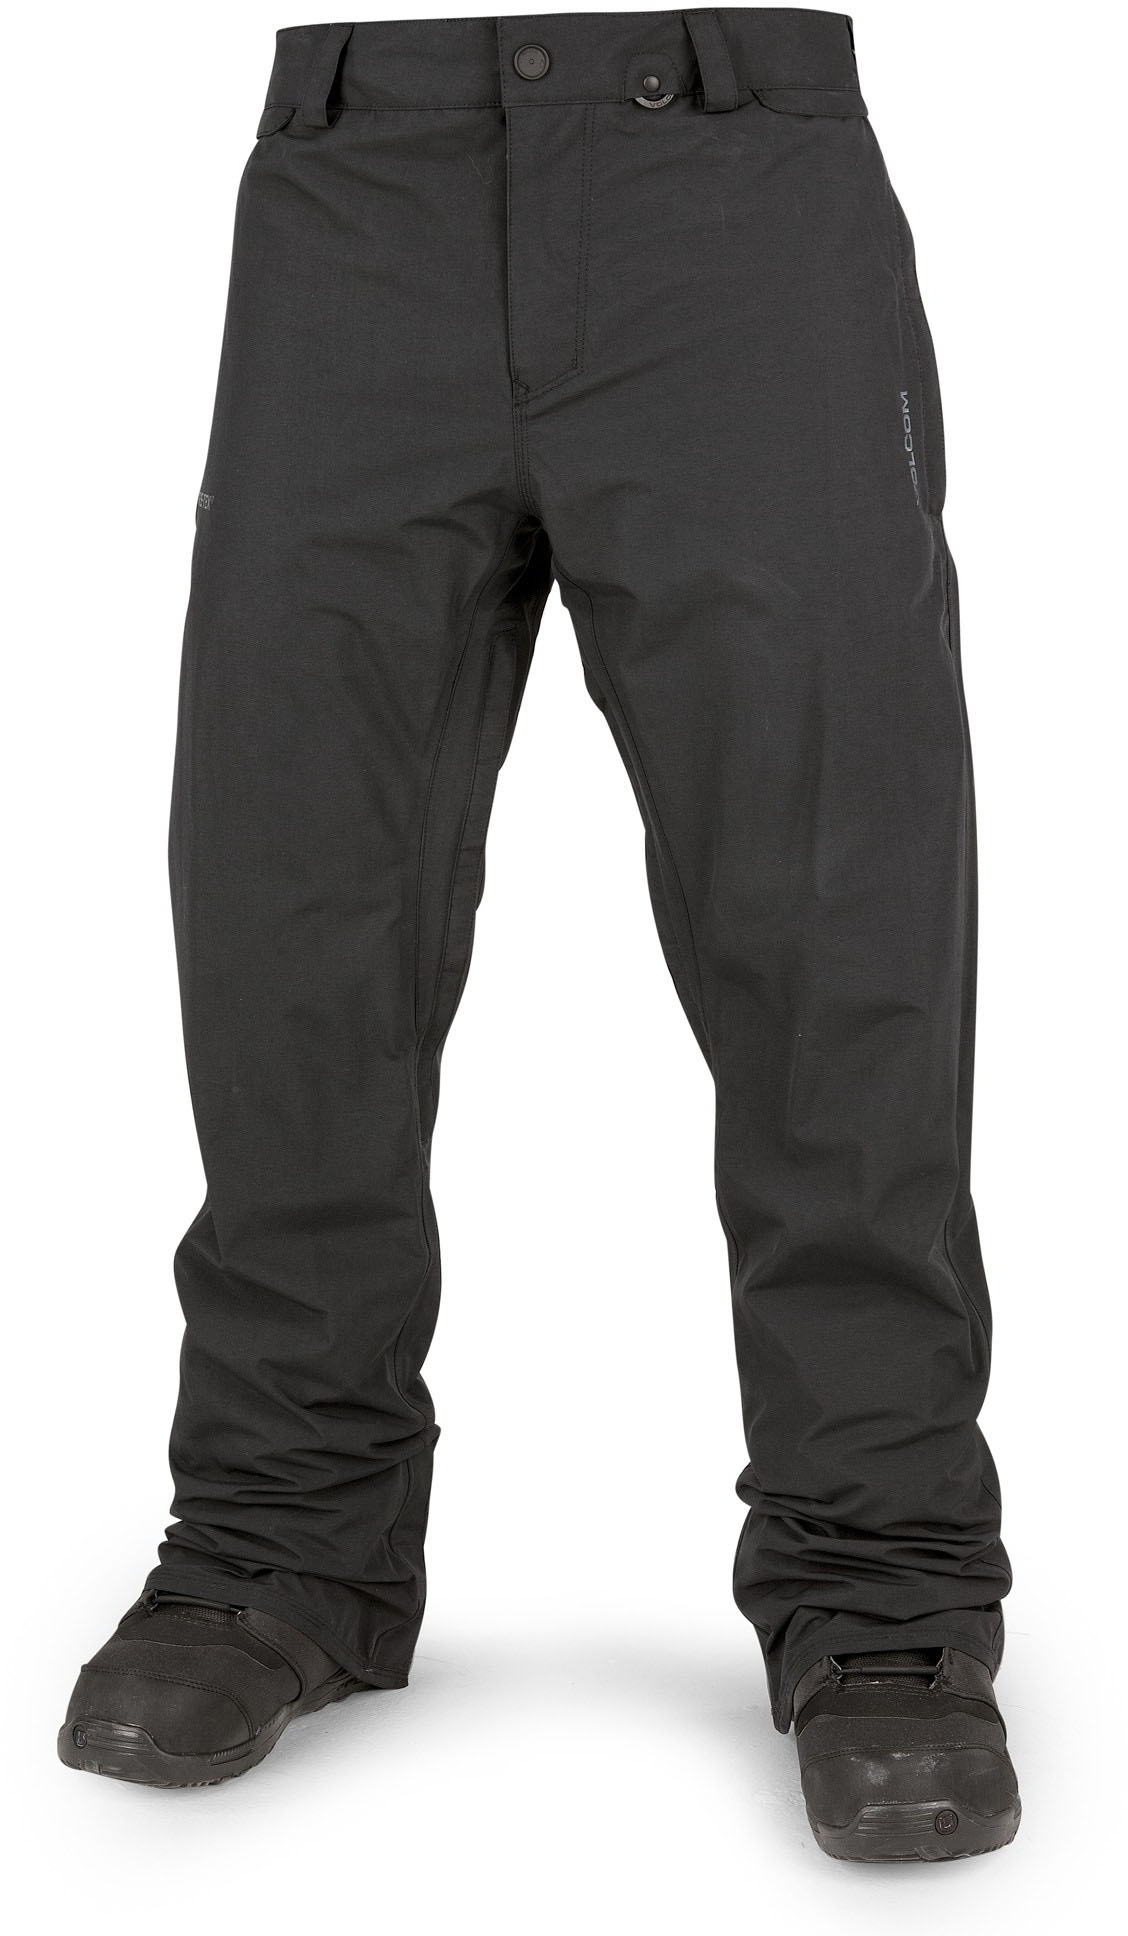 Volcom Freakin Gore-Tex Chino Snowboard Pant Review - The Good Ride